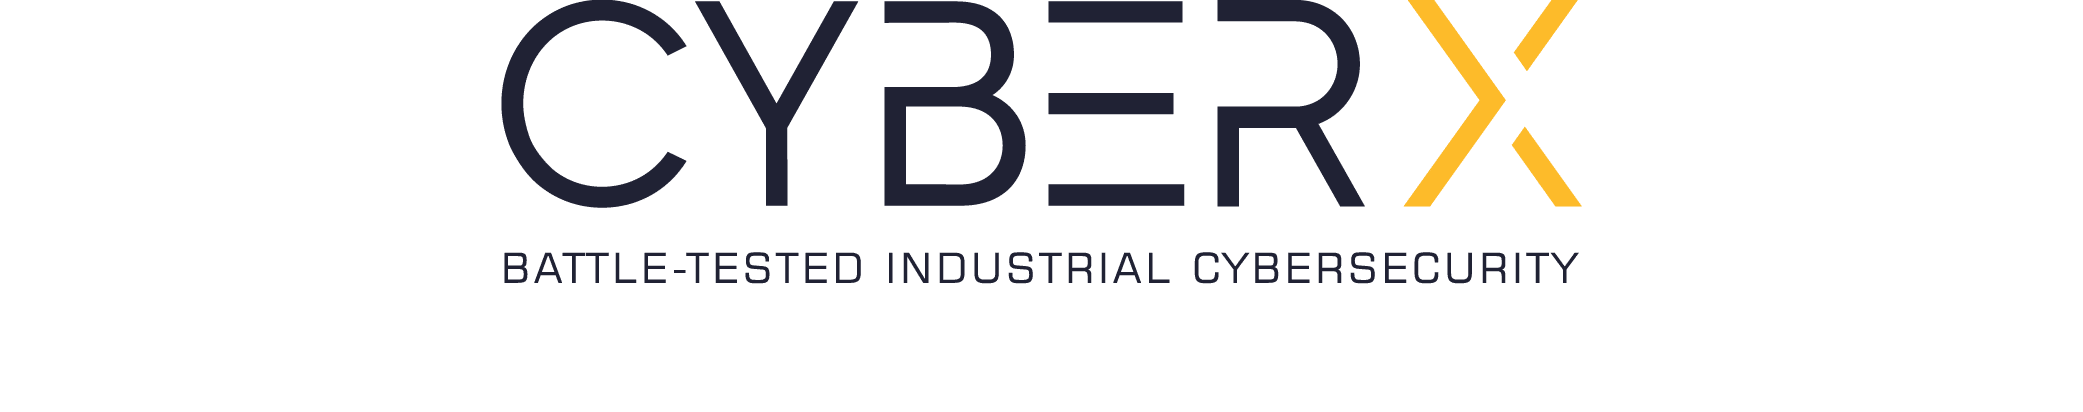 Microsoft Acquires CyberX To Increase IoT Deployment 1 Top10.Digital